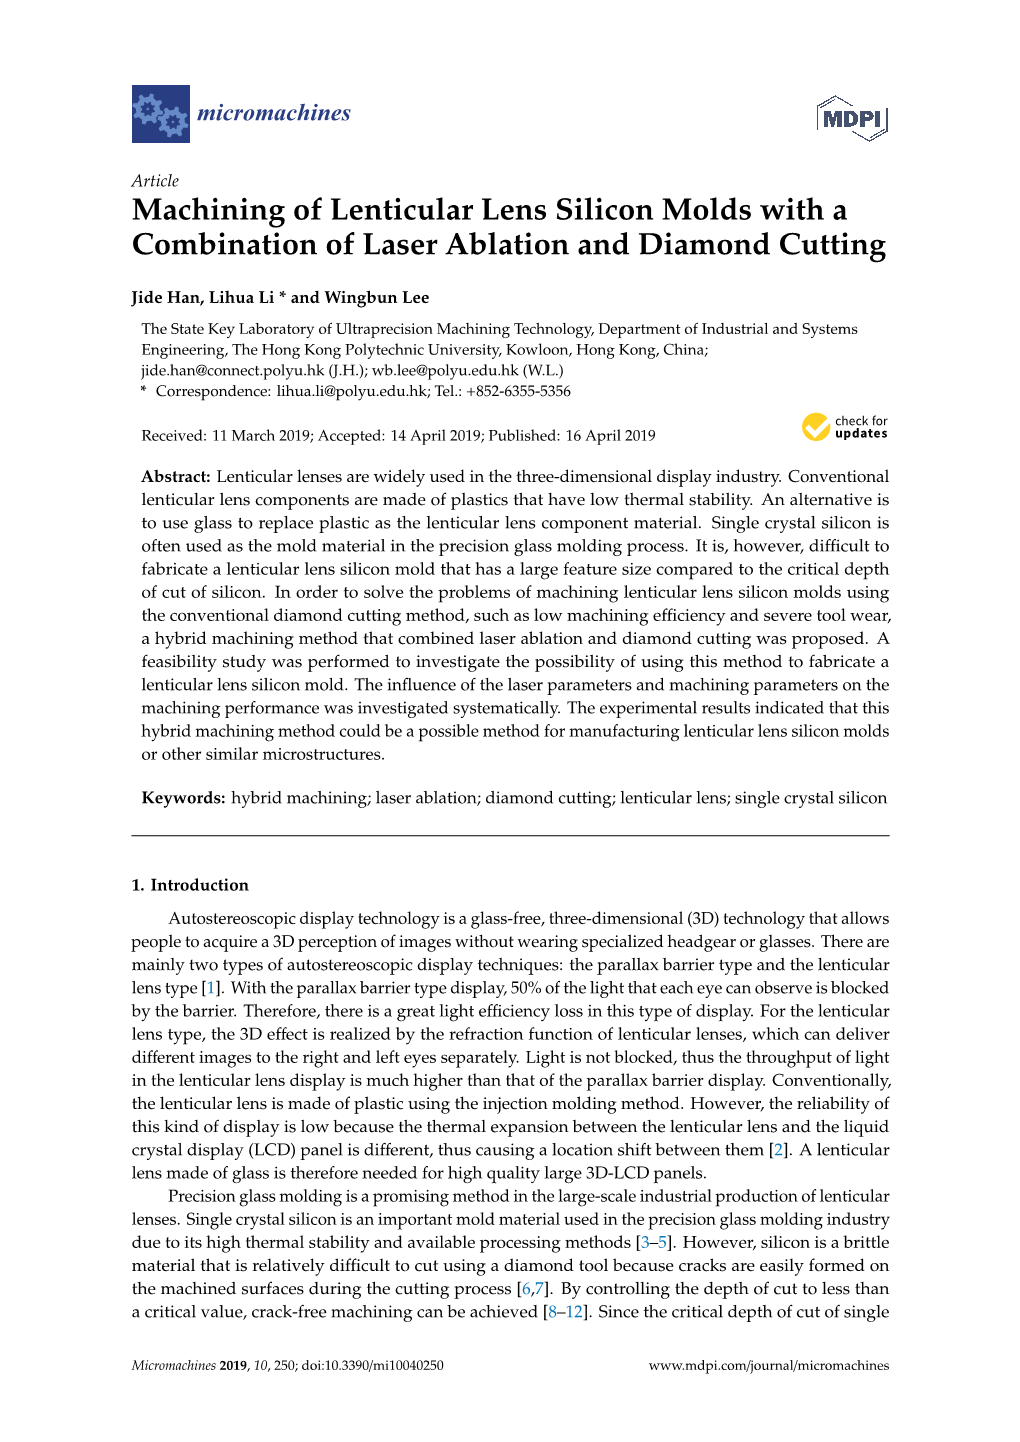 Machining of Lenticular Lens Silicon Molds with a Combination of Laser Ablation and Diamond Cutting